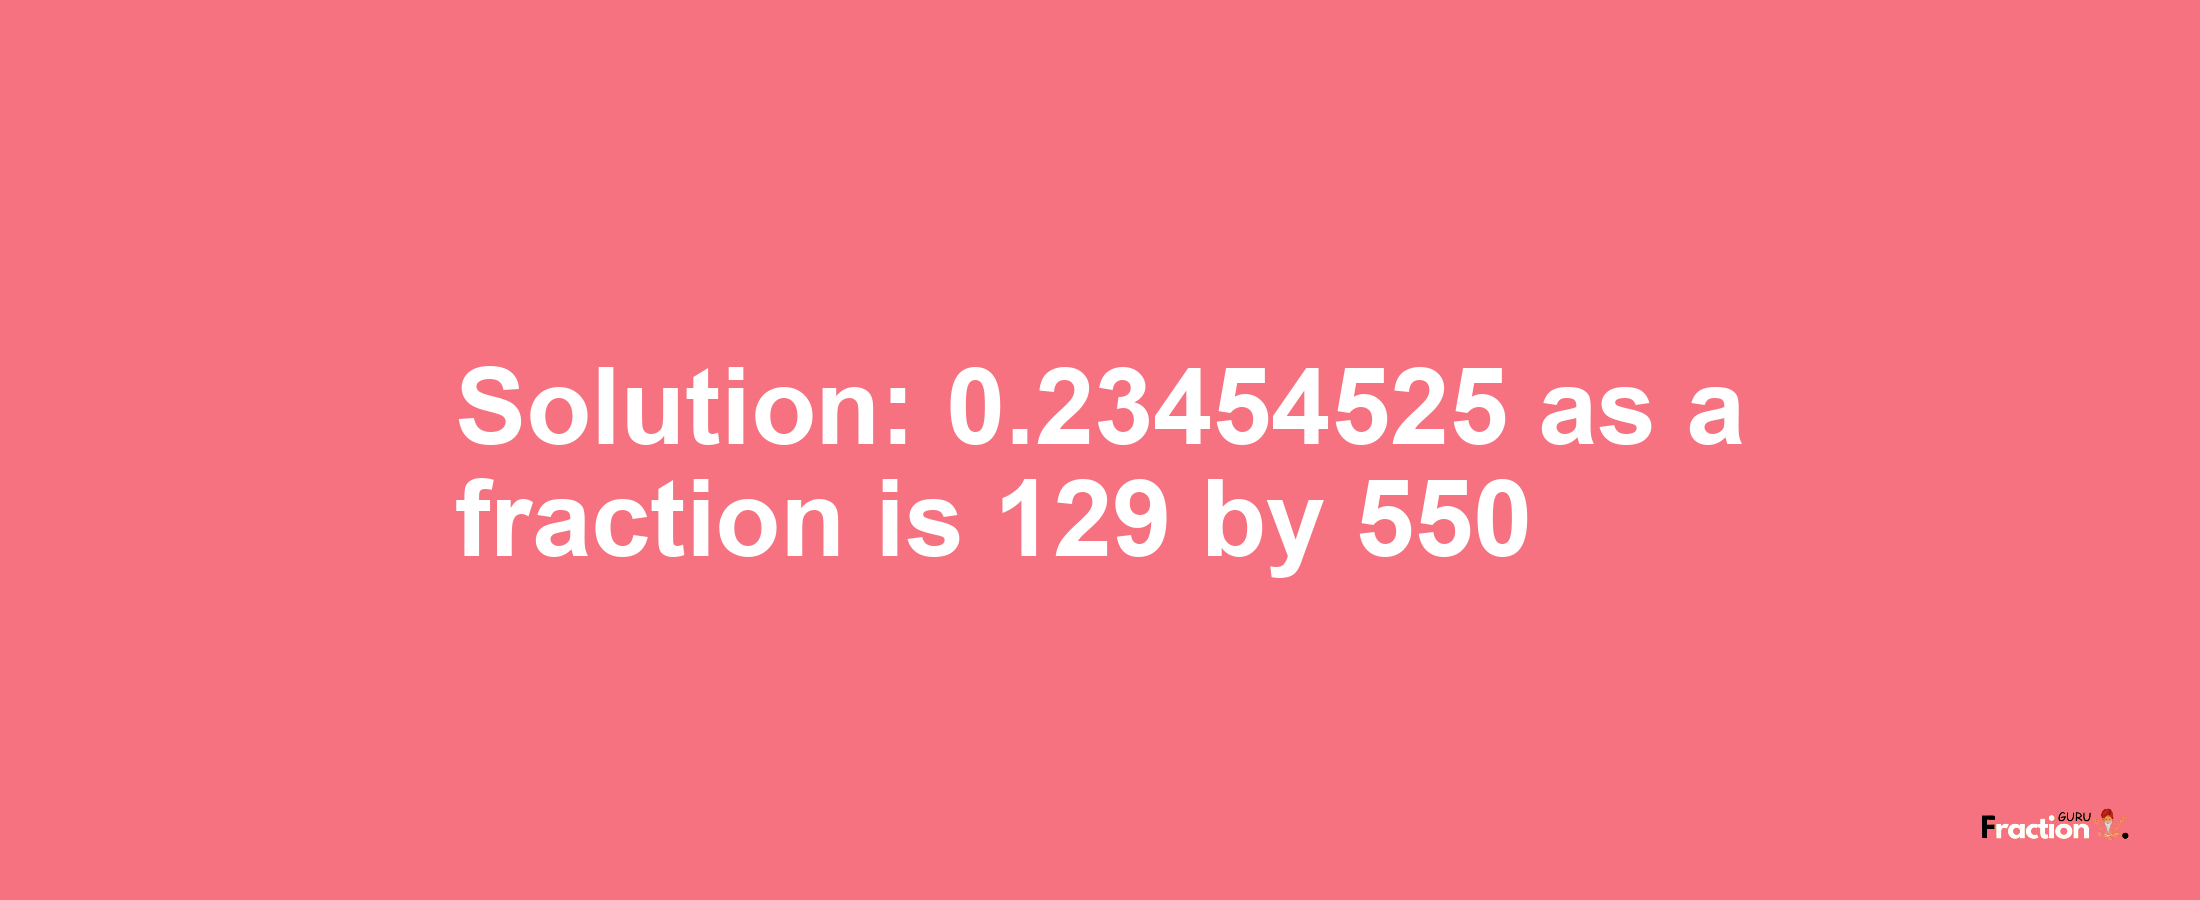 Solution:0.23454525 as a fraction is 129/550